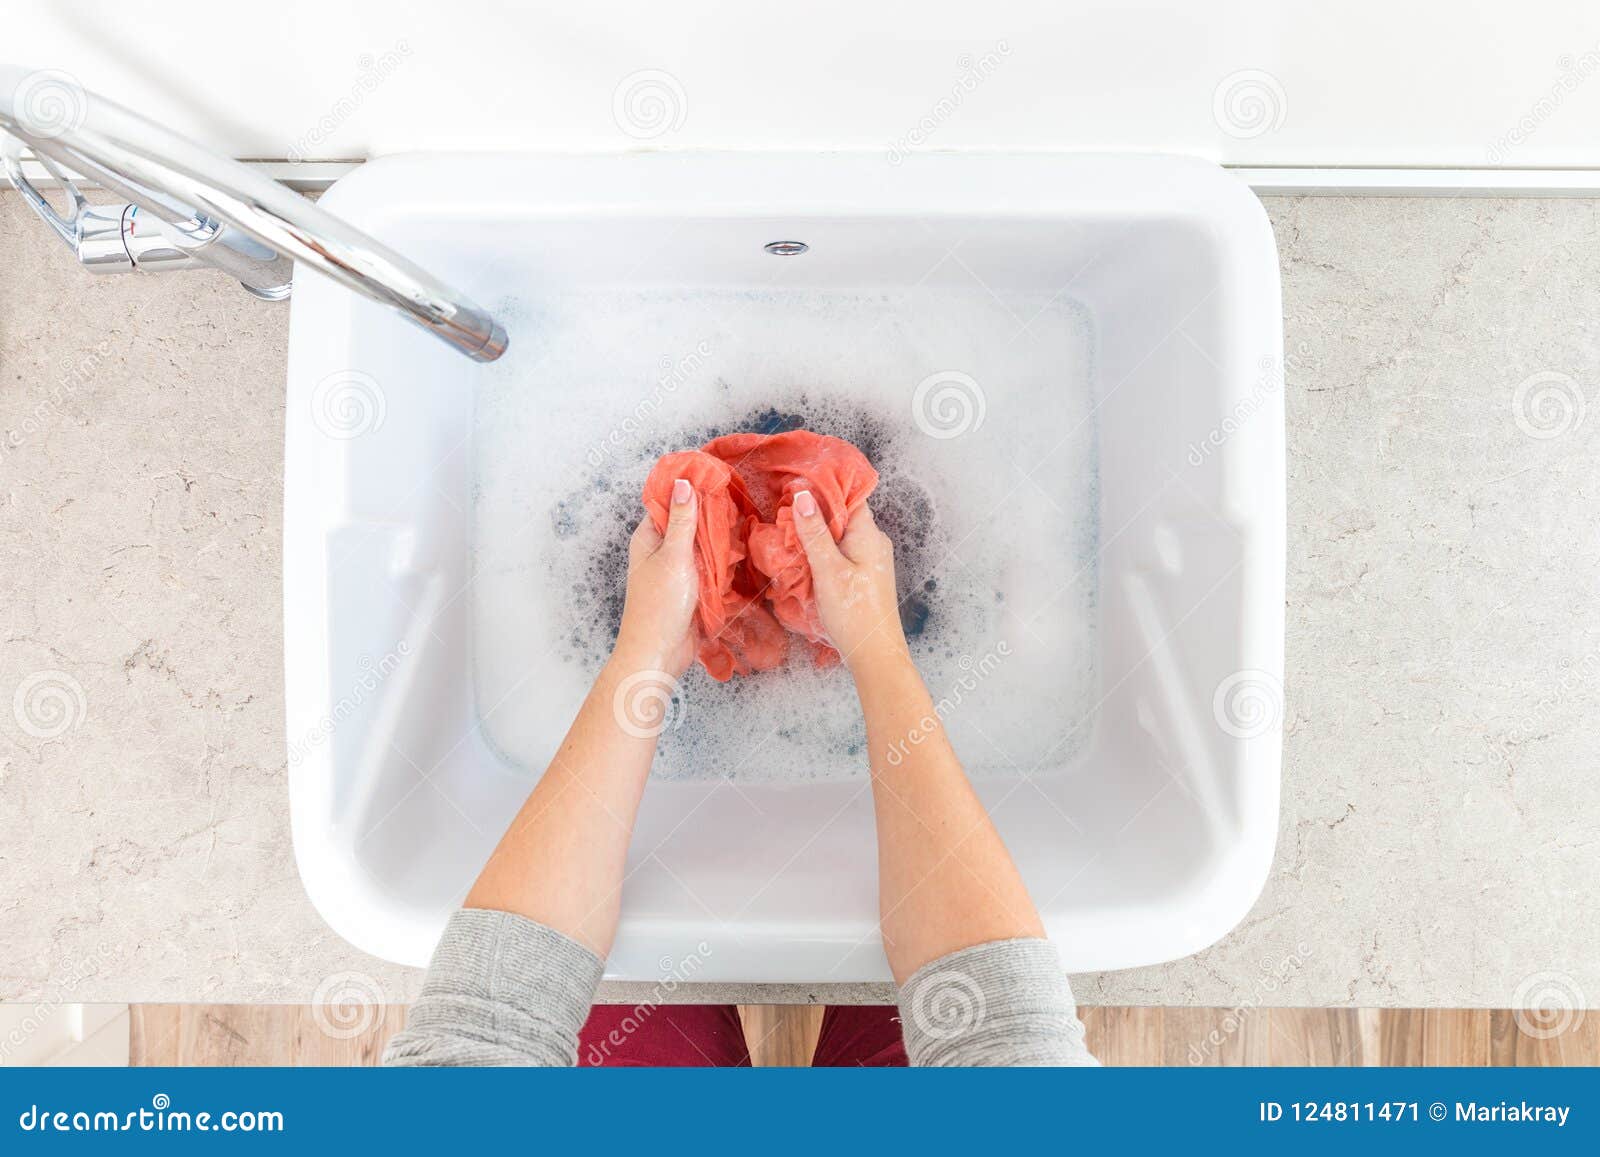 Female Hands Washing Color Clothes In Sink Stock Image